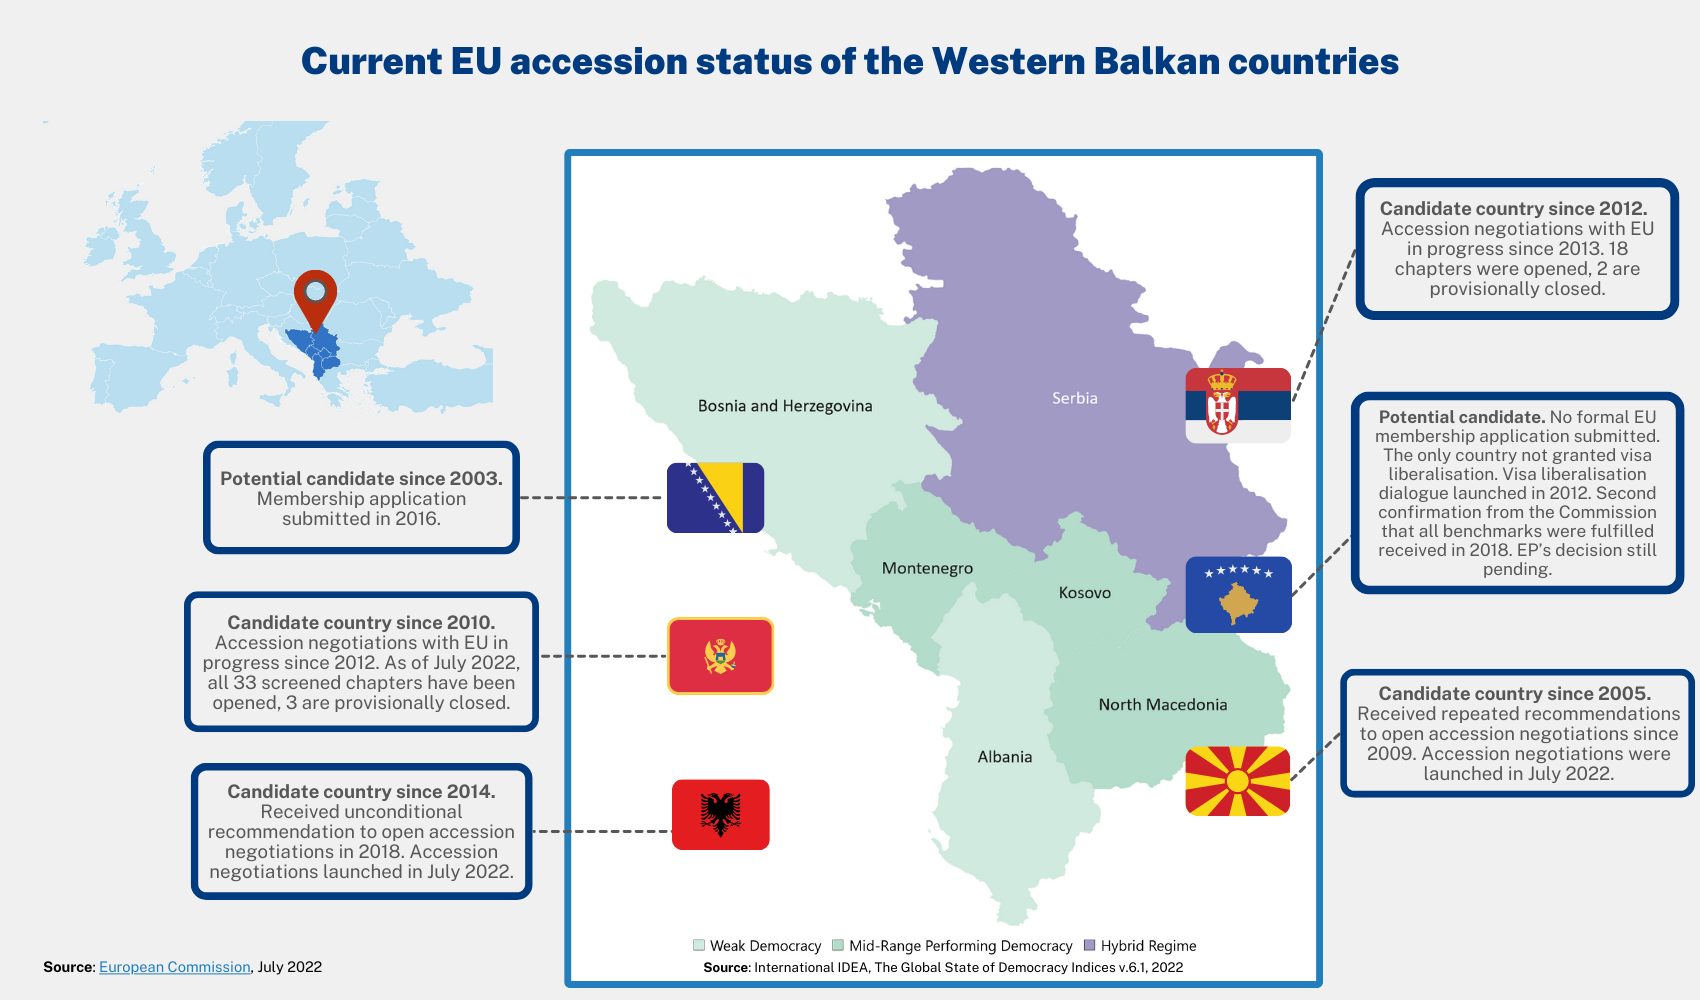 Balkan Countries/What are the Balkan Countries?